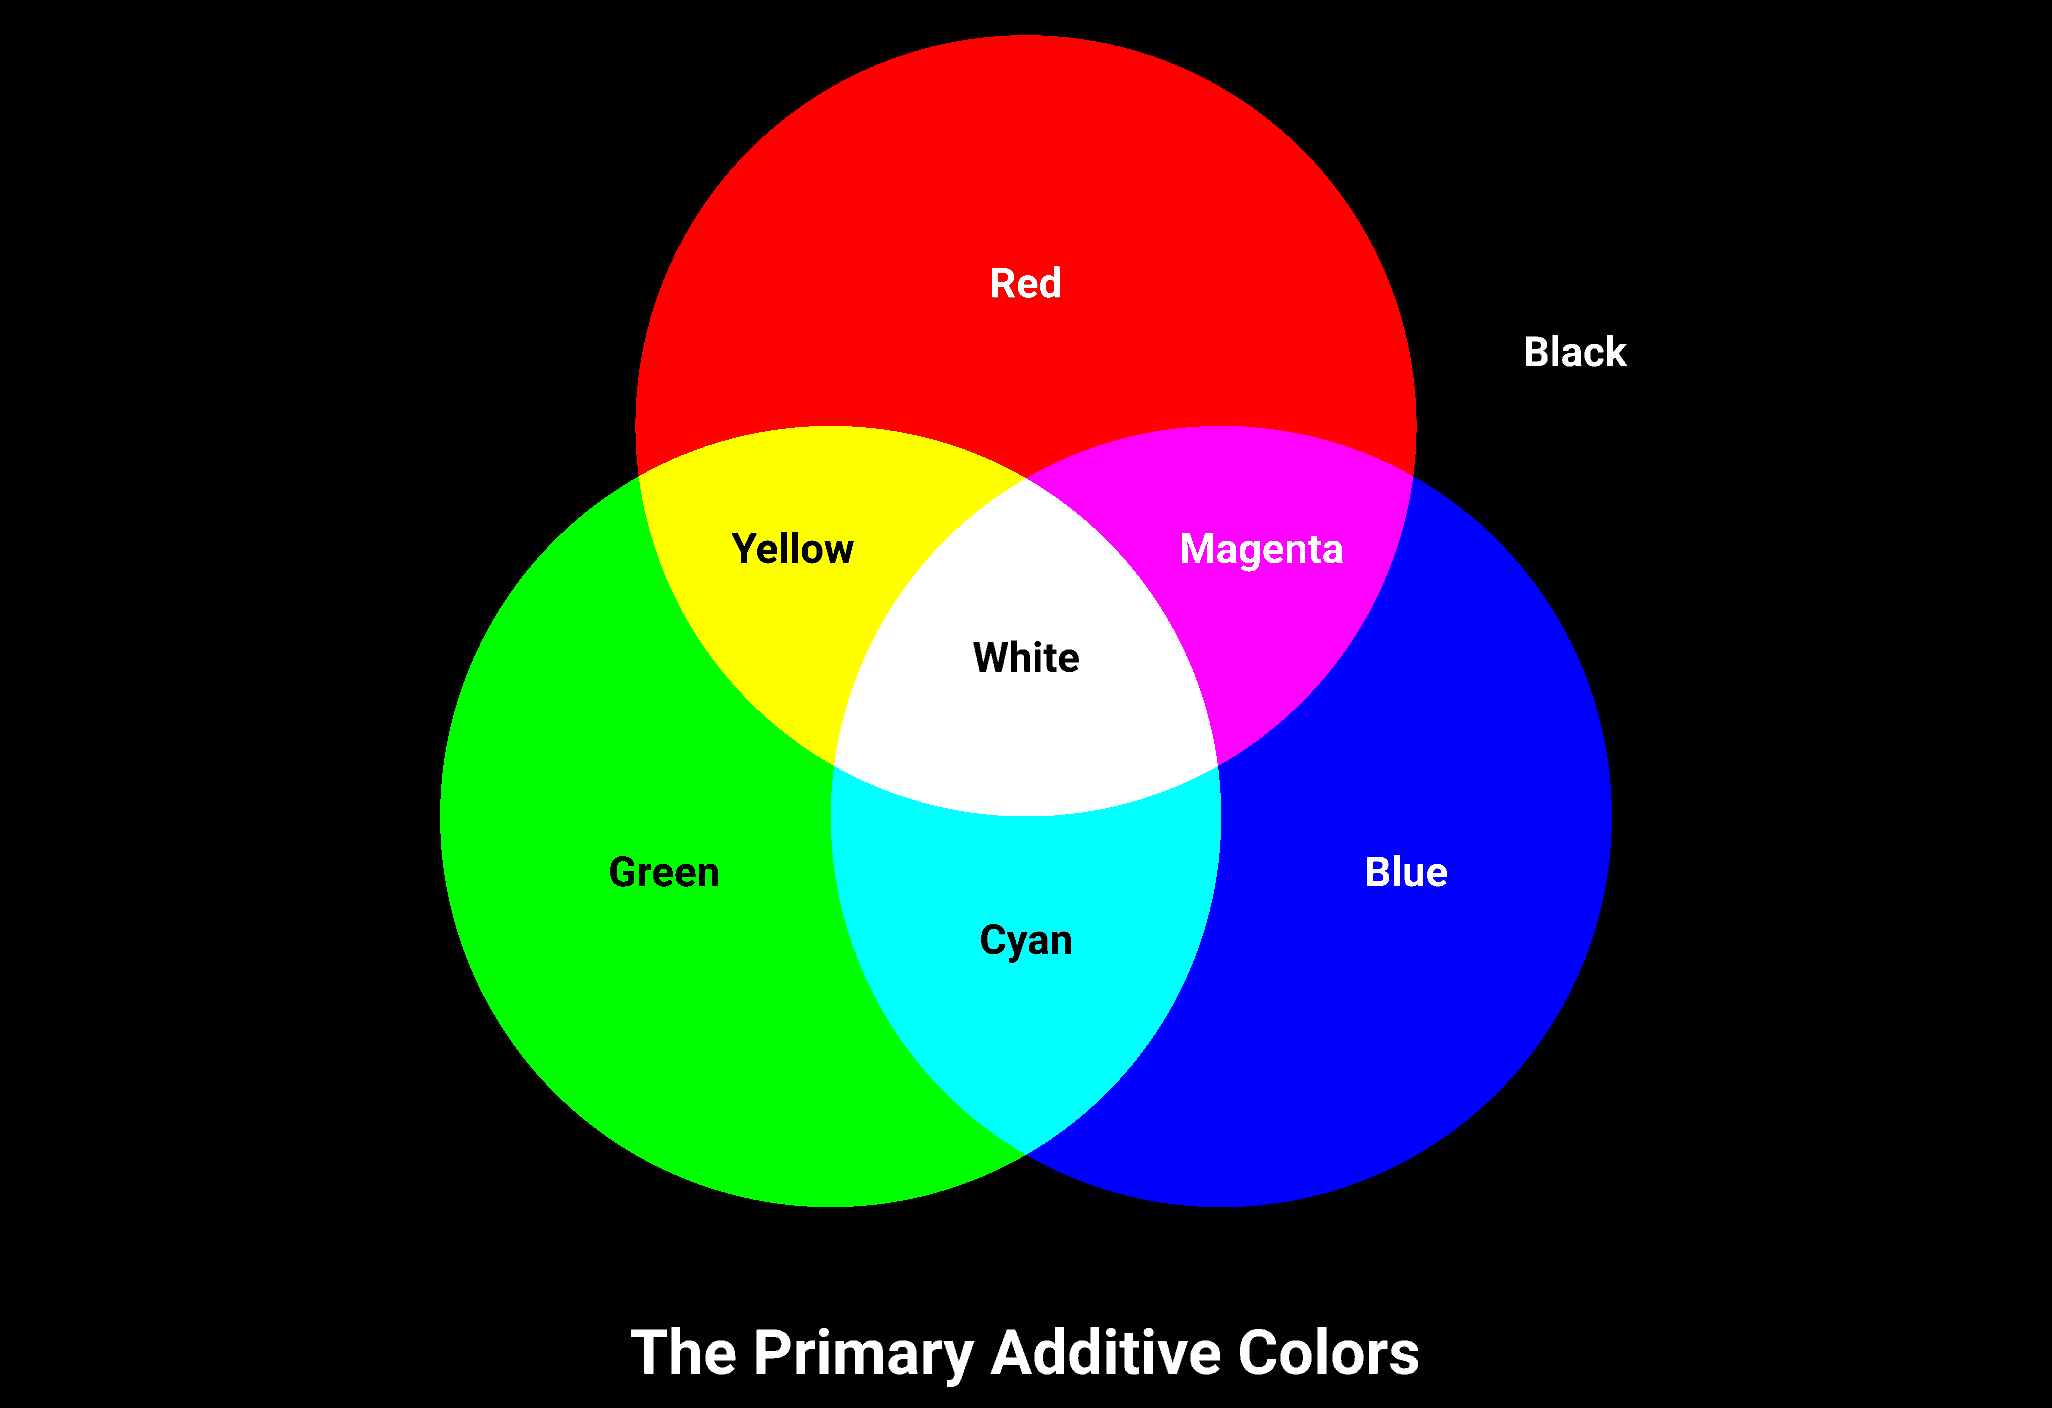 The primary additive colors.